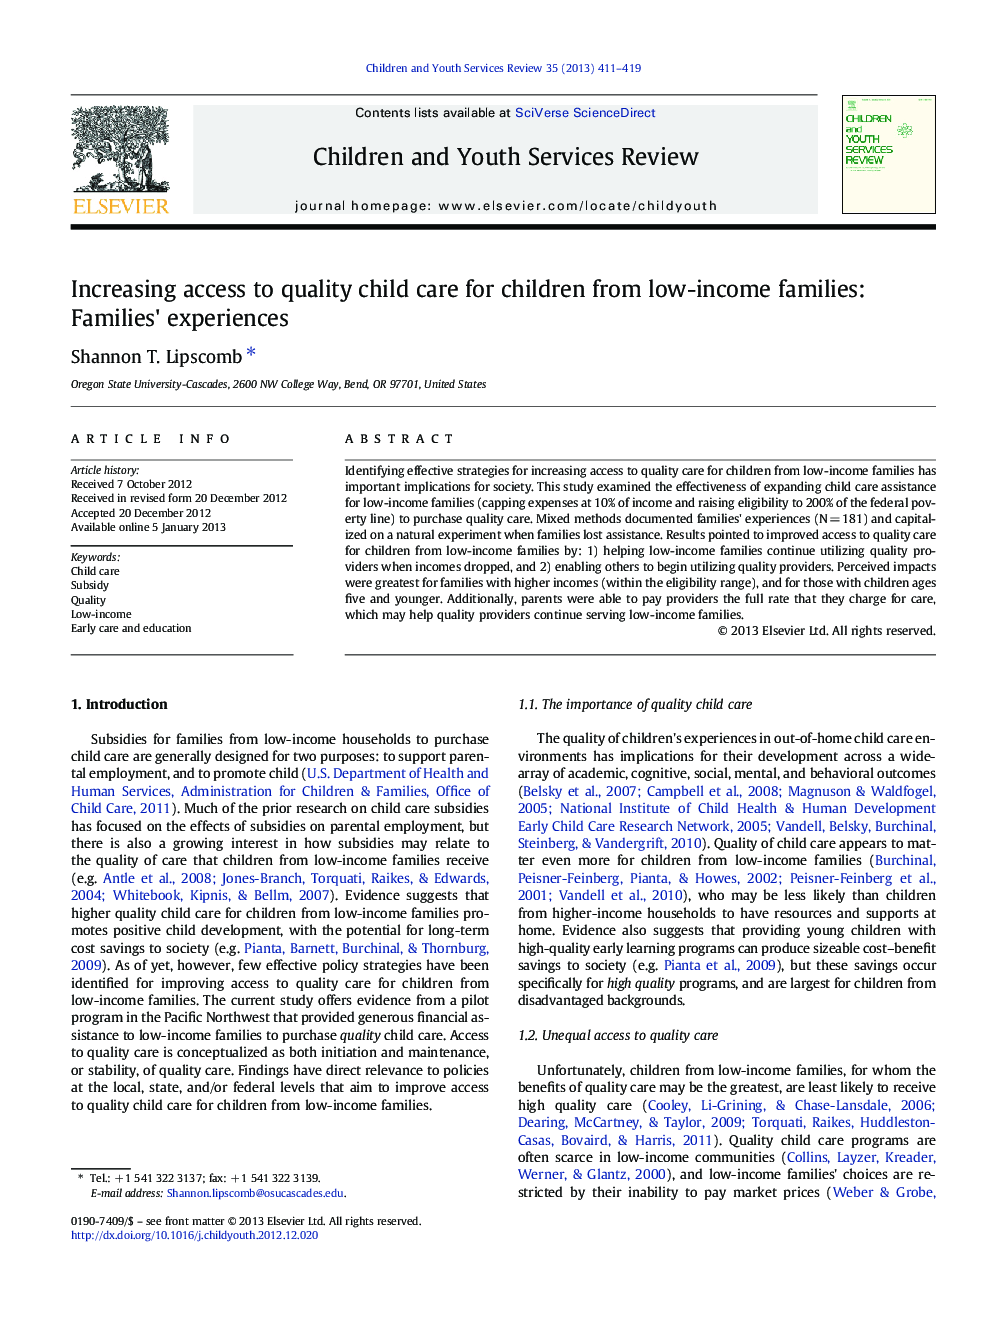 Increasing access to quality child care for children from low-income families: Families' experiences